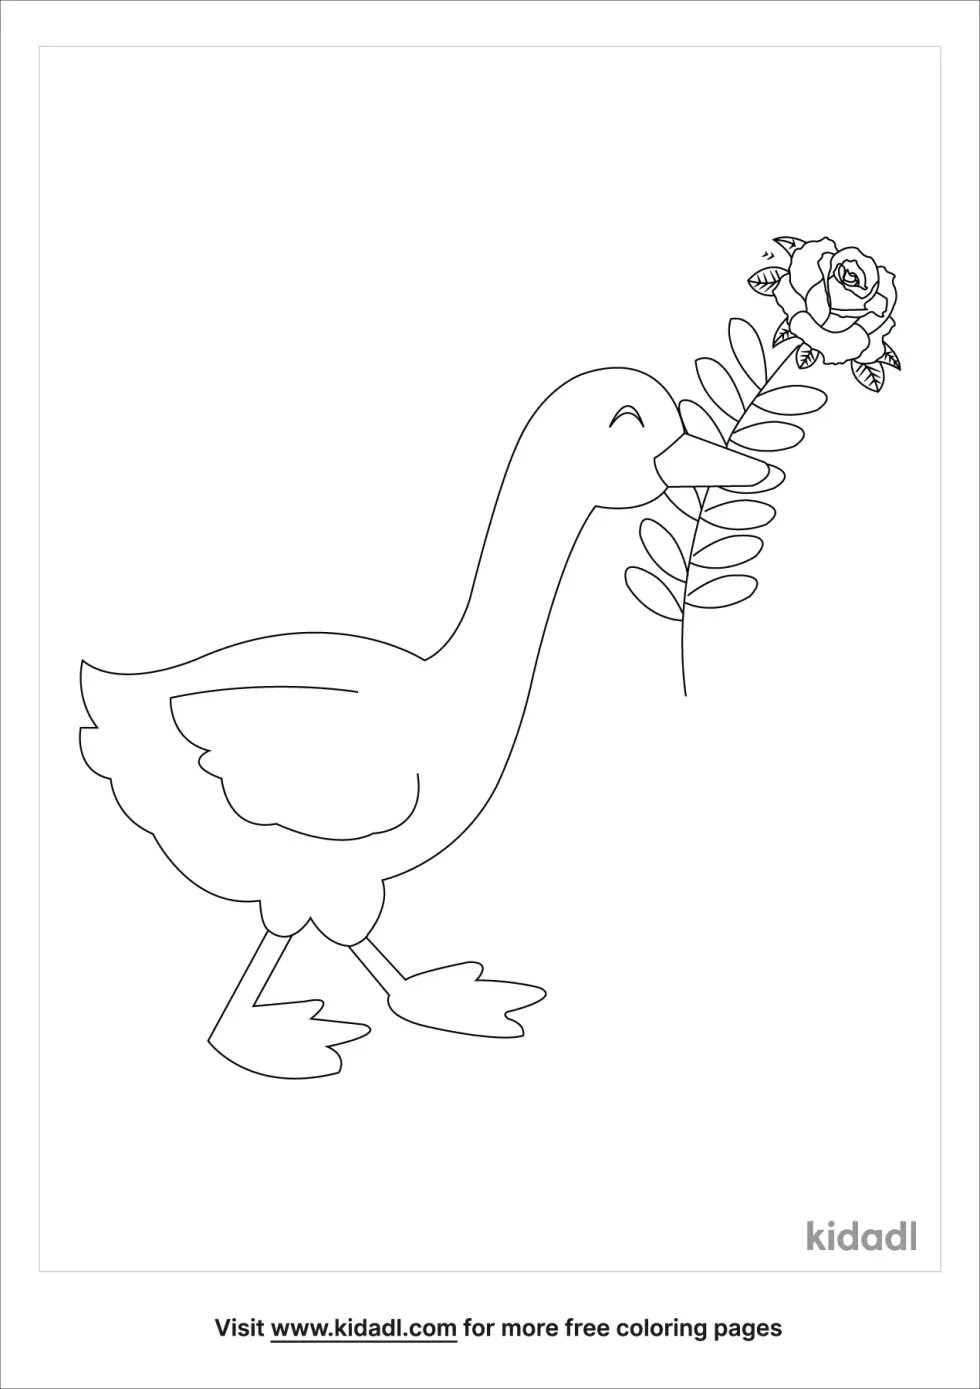 Duck With Flower Coloring Page